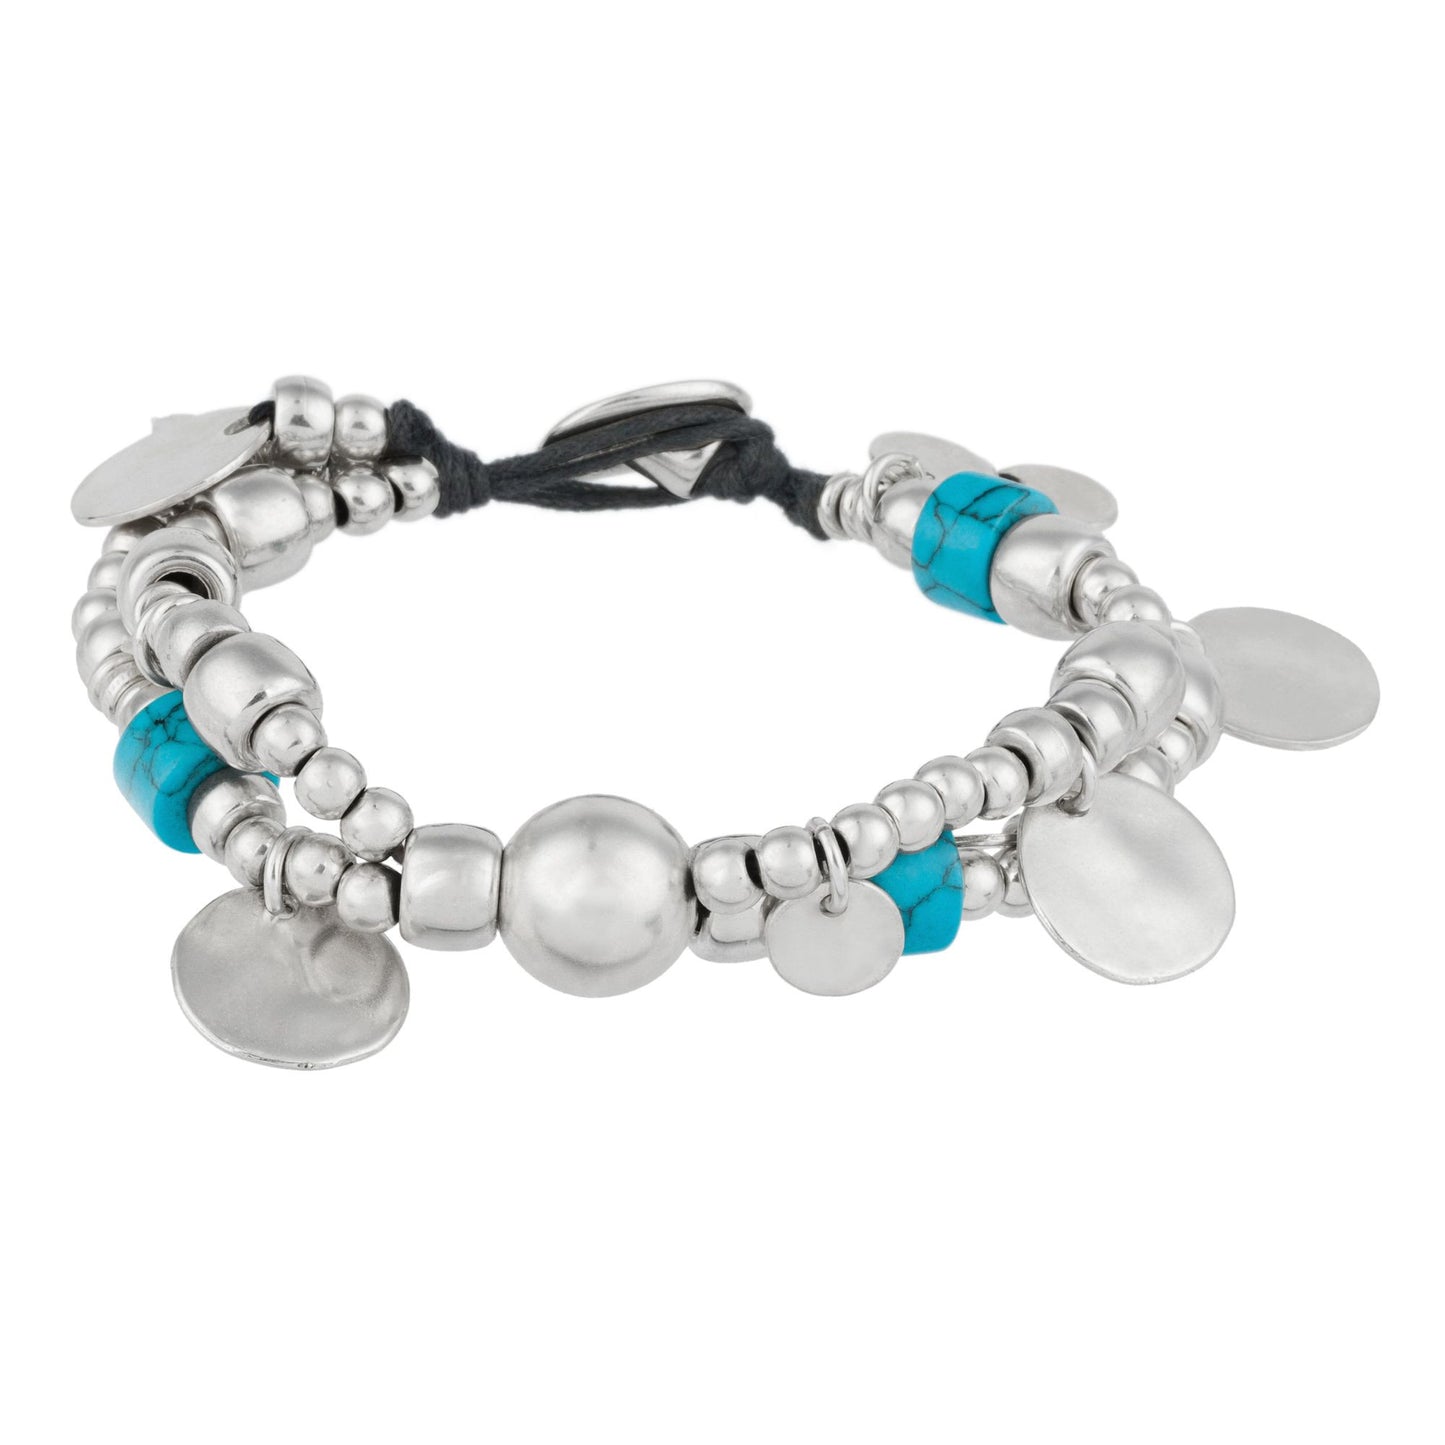 Multibead silver and turquoise double bracelet